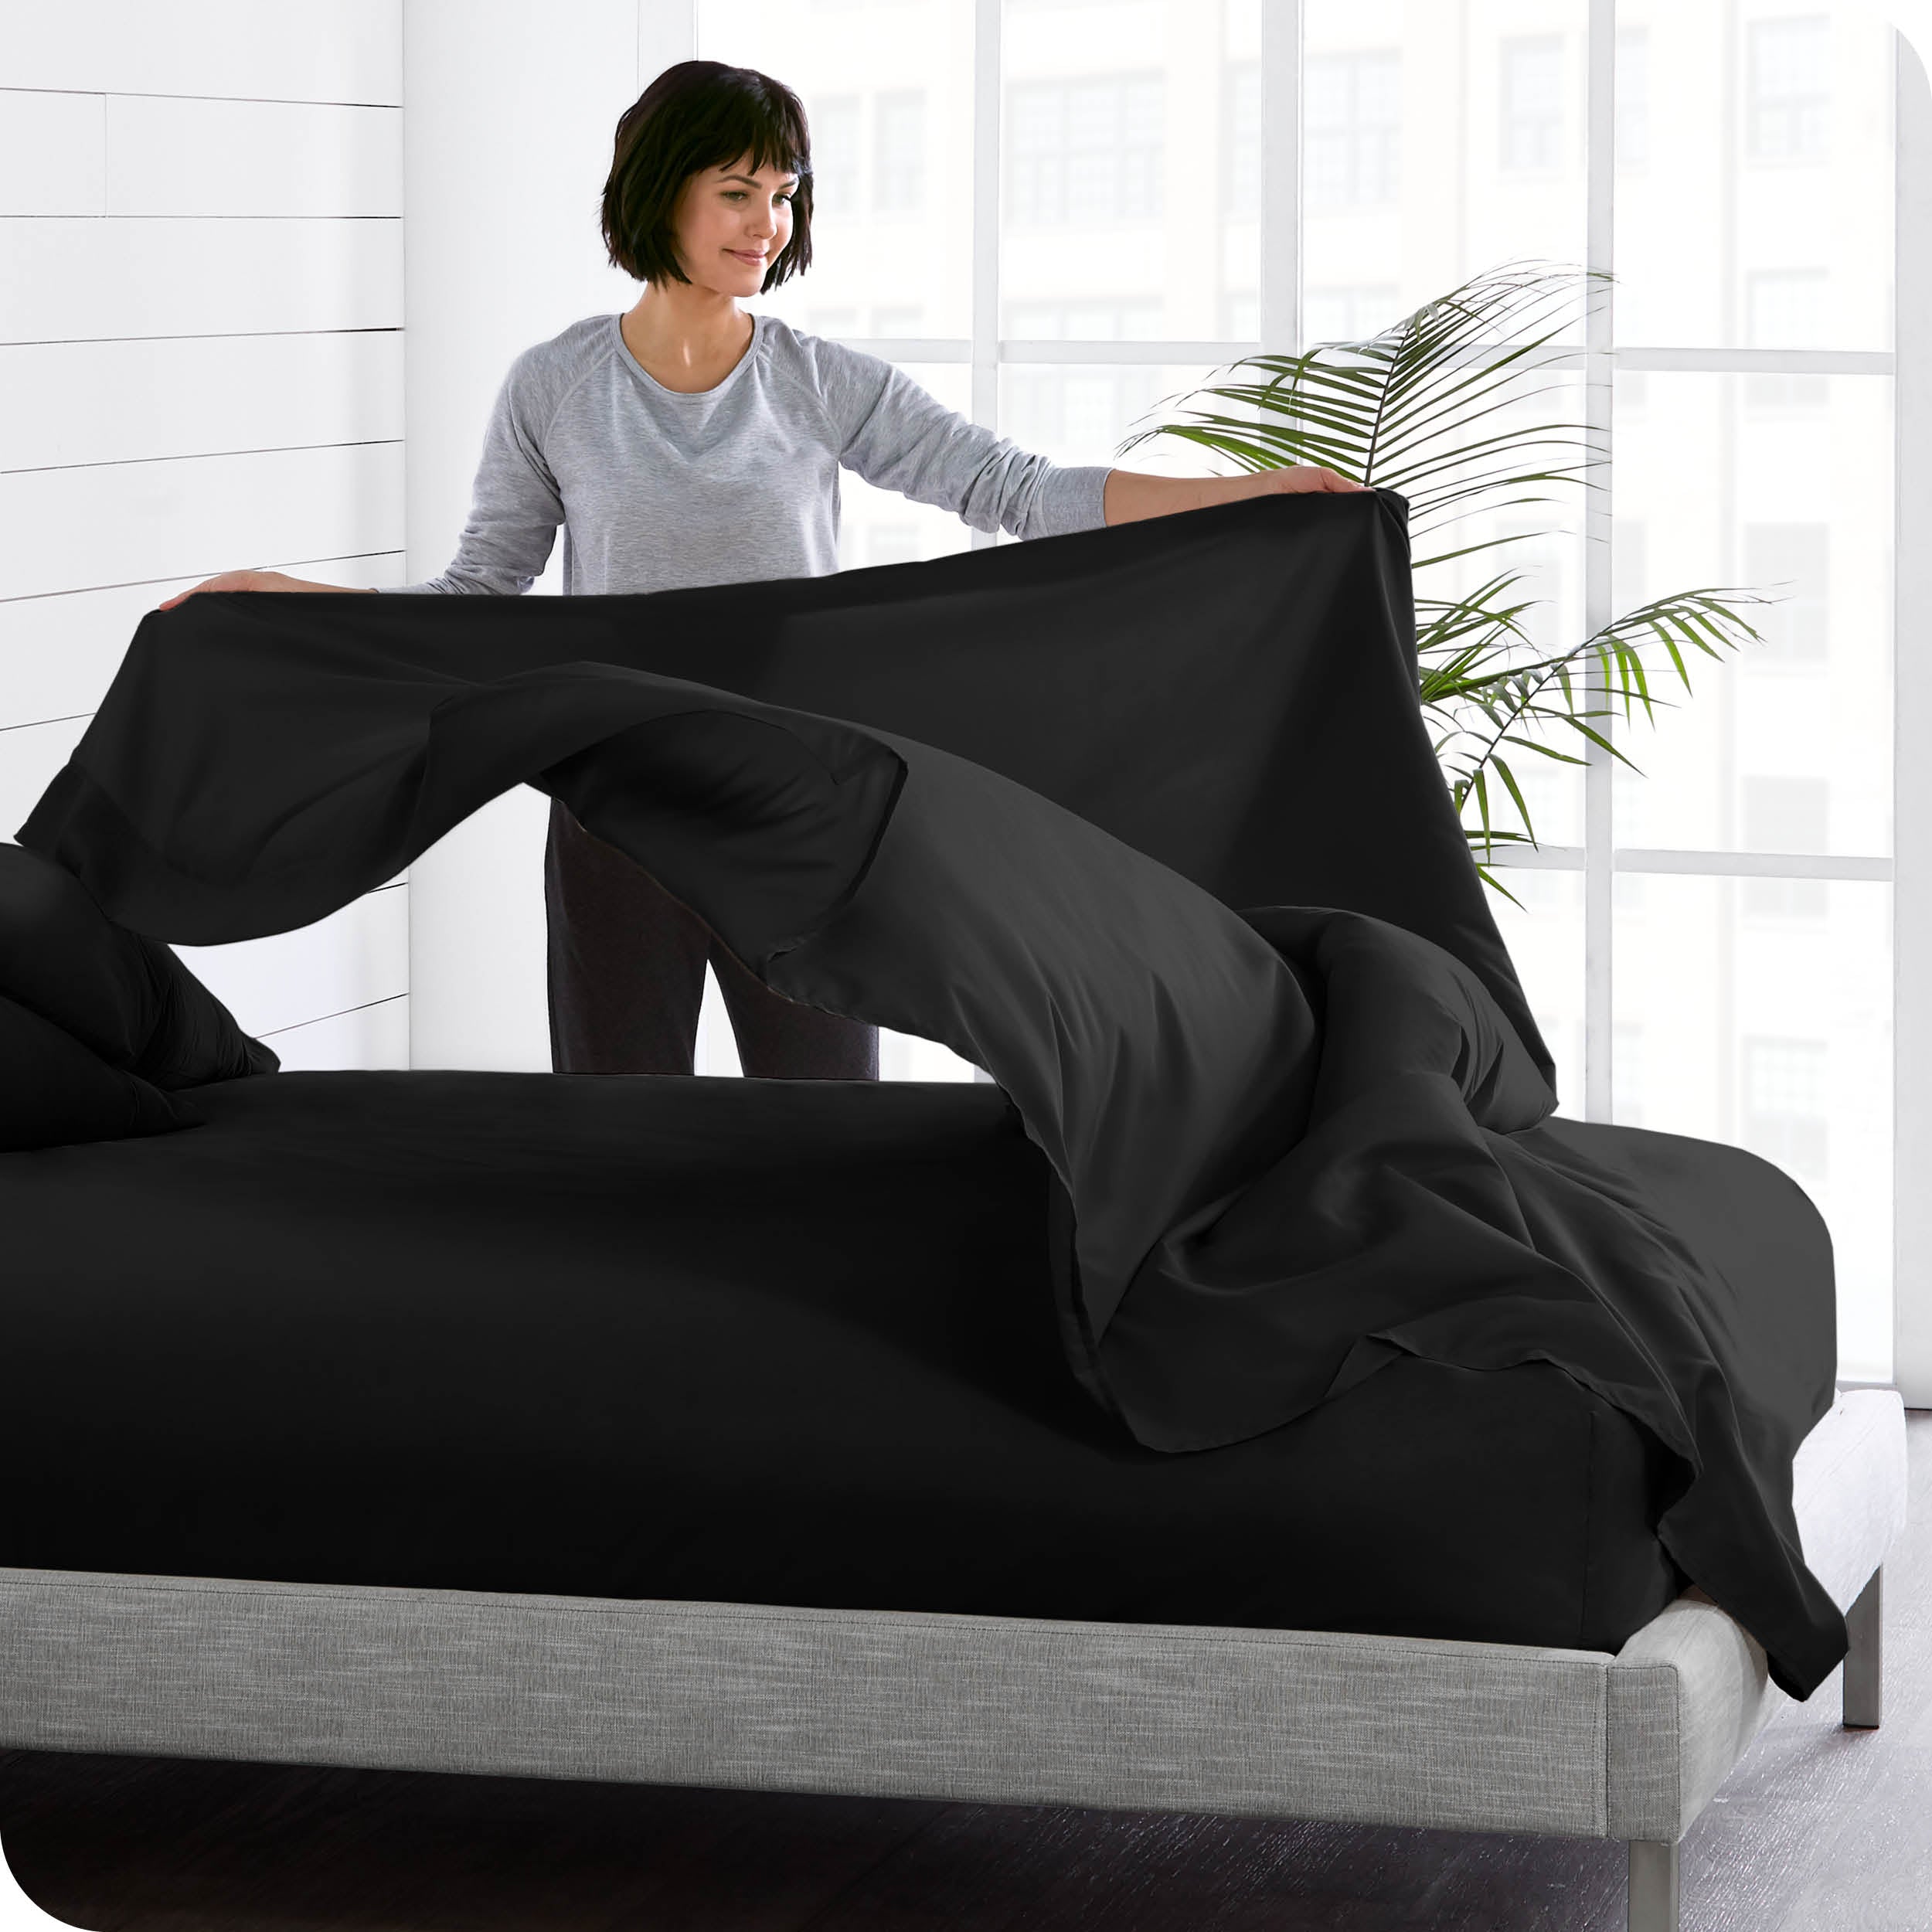 A woman is standing at the side of a bed putting a flat sheet on top of the mattress which has a fitted sheet on it